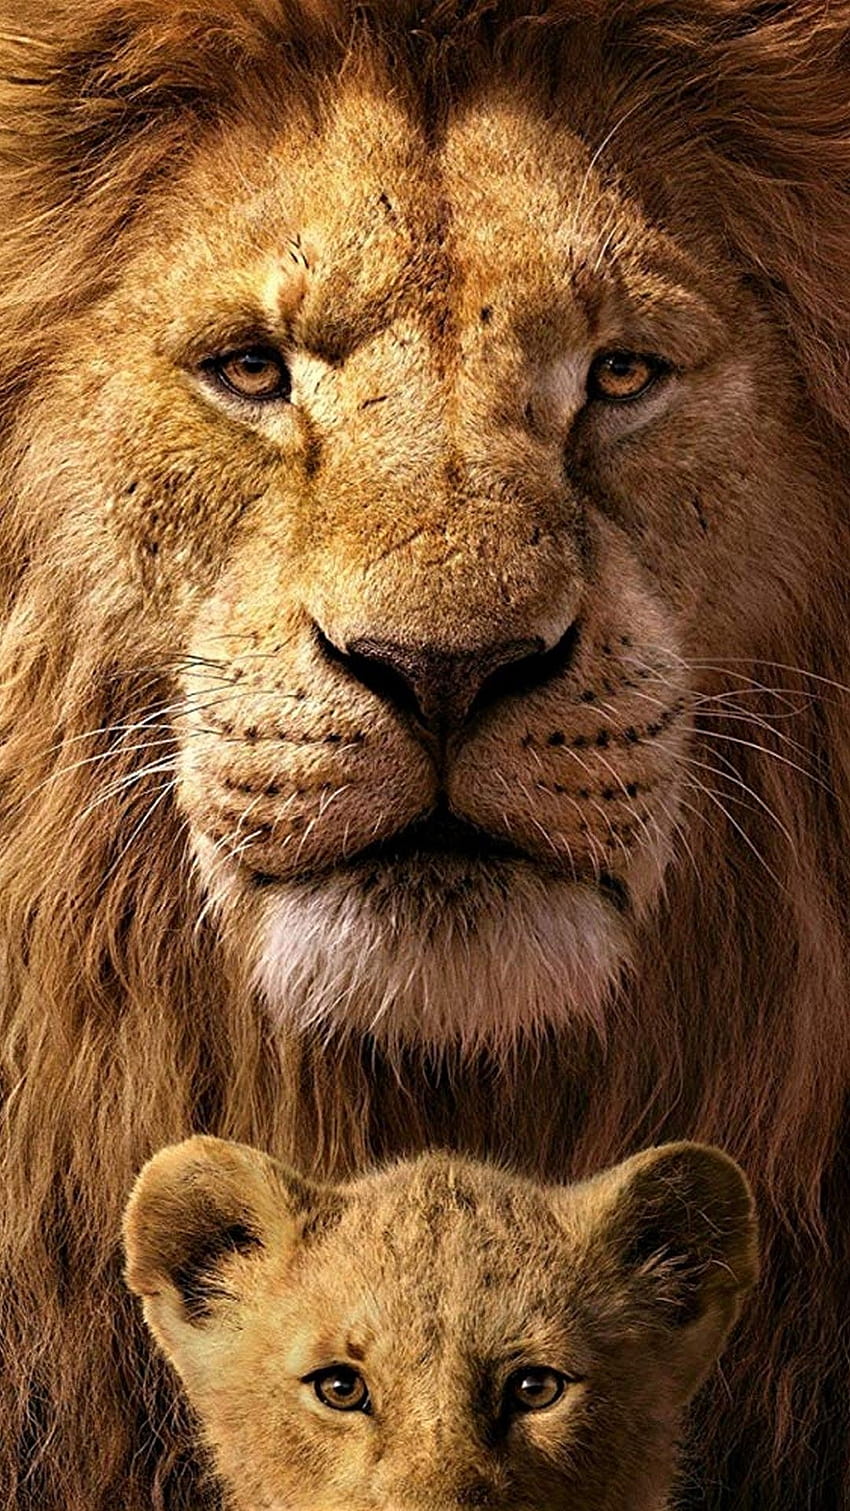 King of the jungle lion wallpaper  HD 1080p wallpapers  Facebook